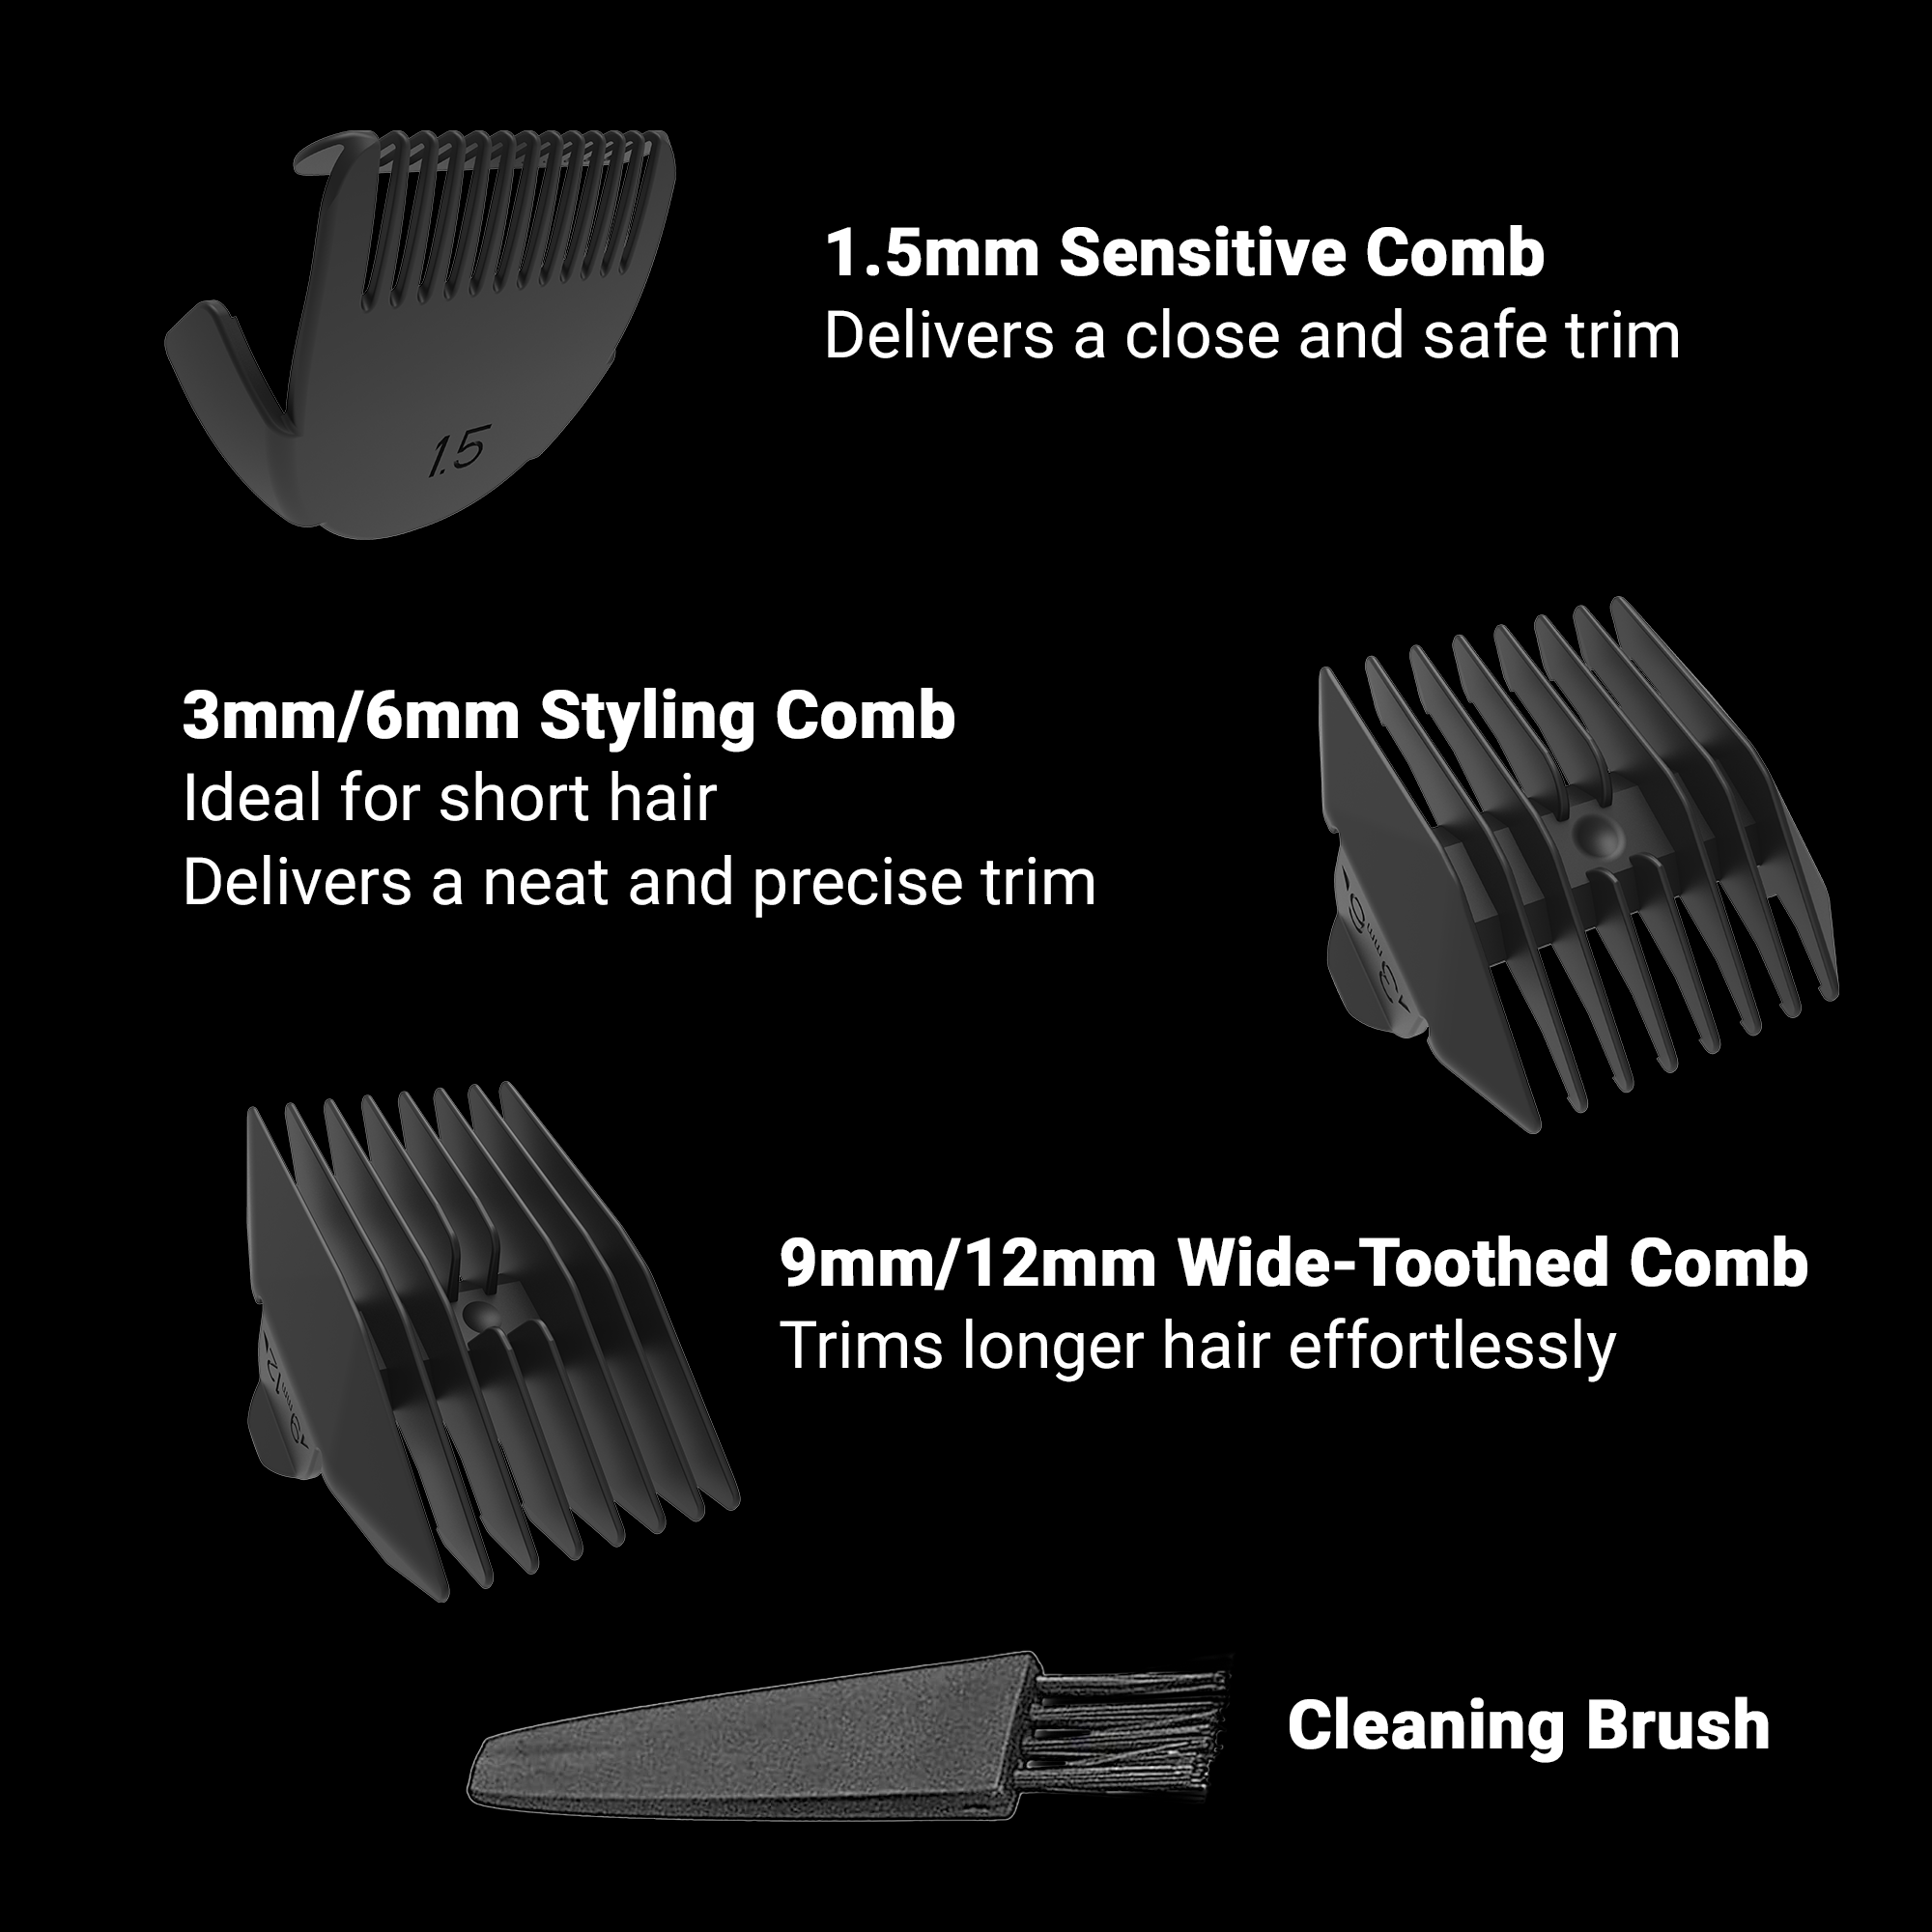 Set of 3 Guide Combs with cleaning brush for Zlade Ballistic ZW2.0 Trimmer (1.5mm, 3mm/6mm, 9mm/12mm)